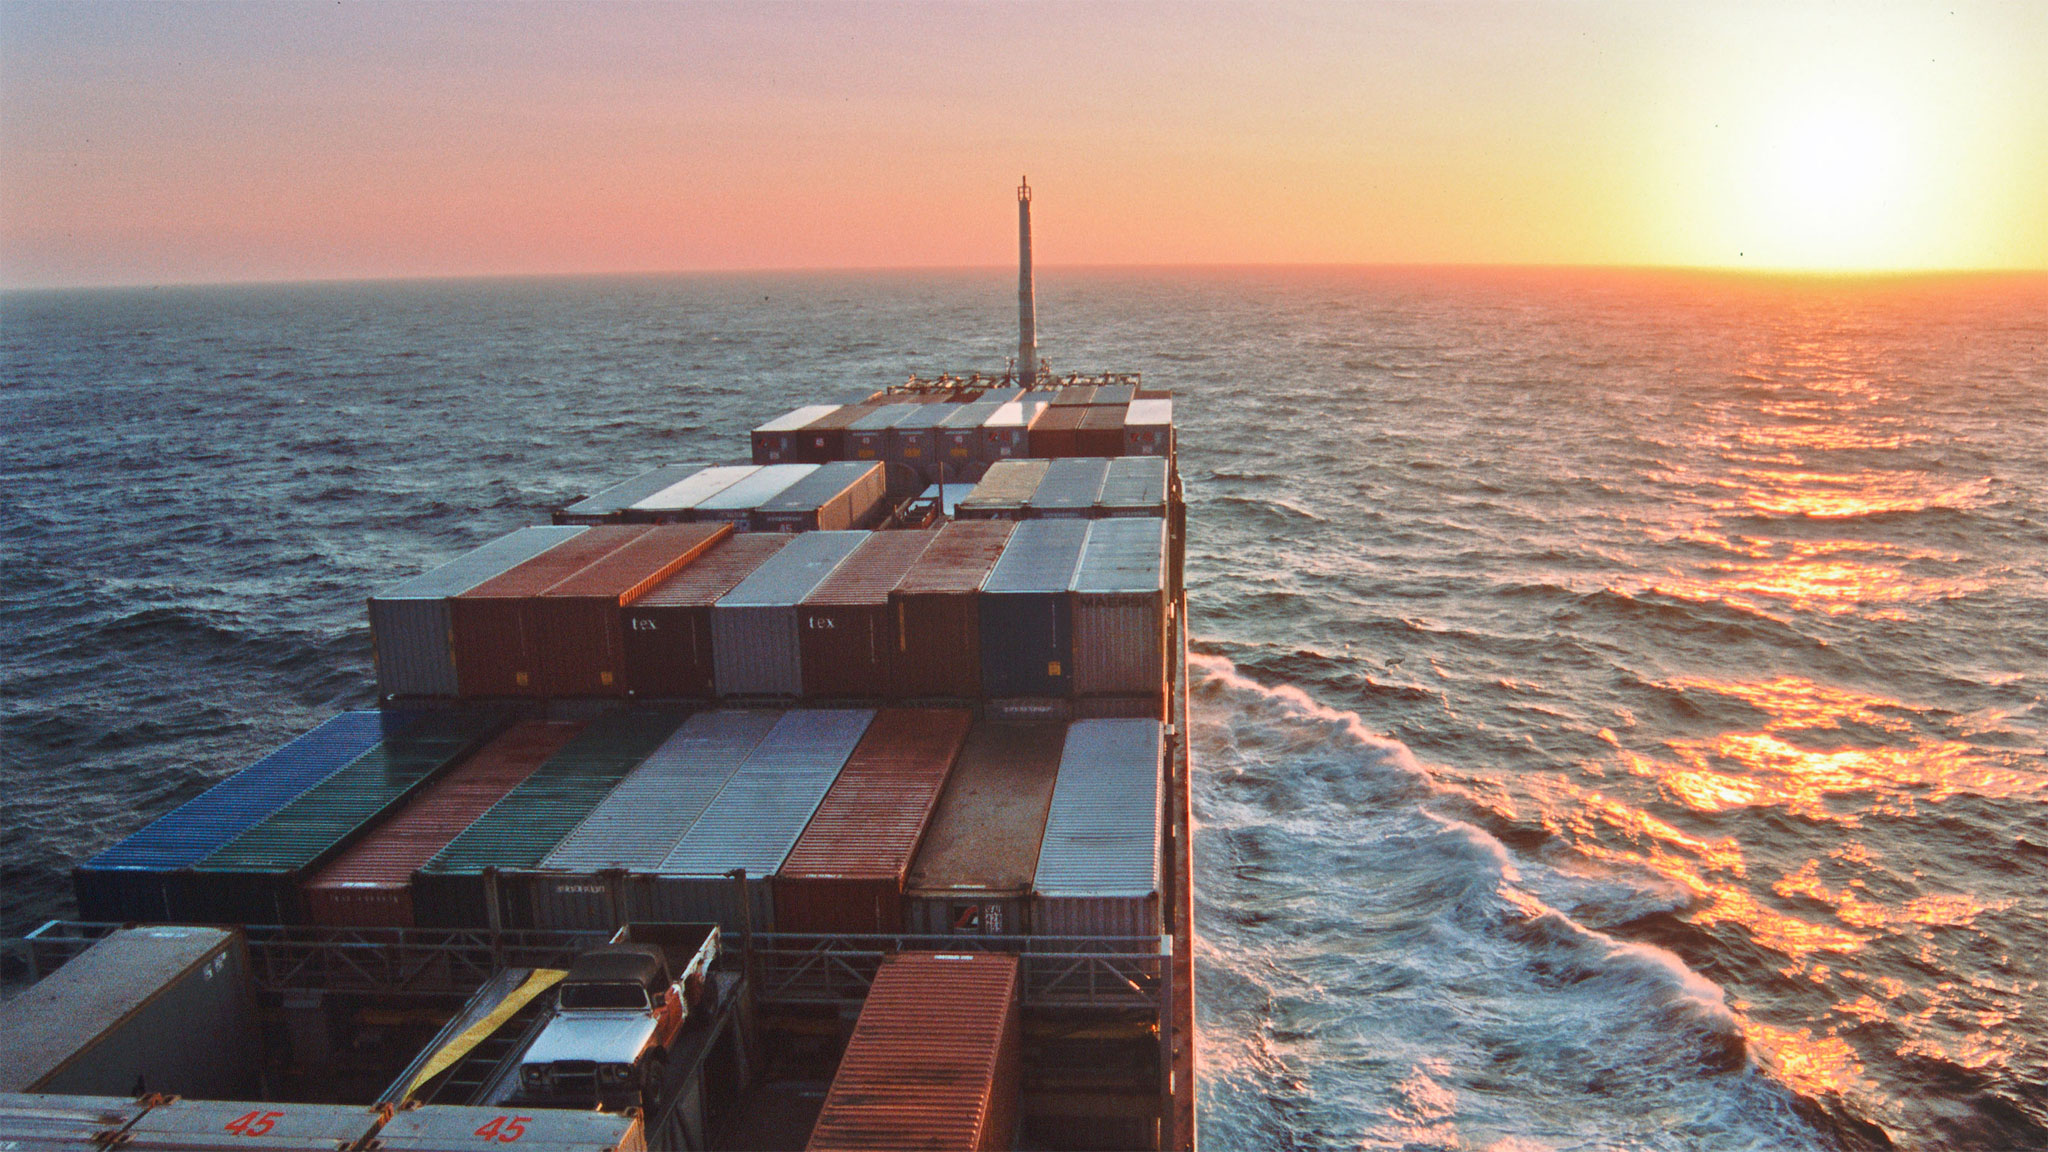 A freight adventure: Sailing the oceans on a container ship ...